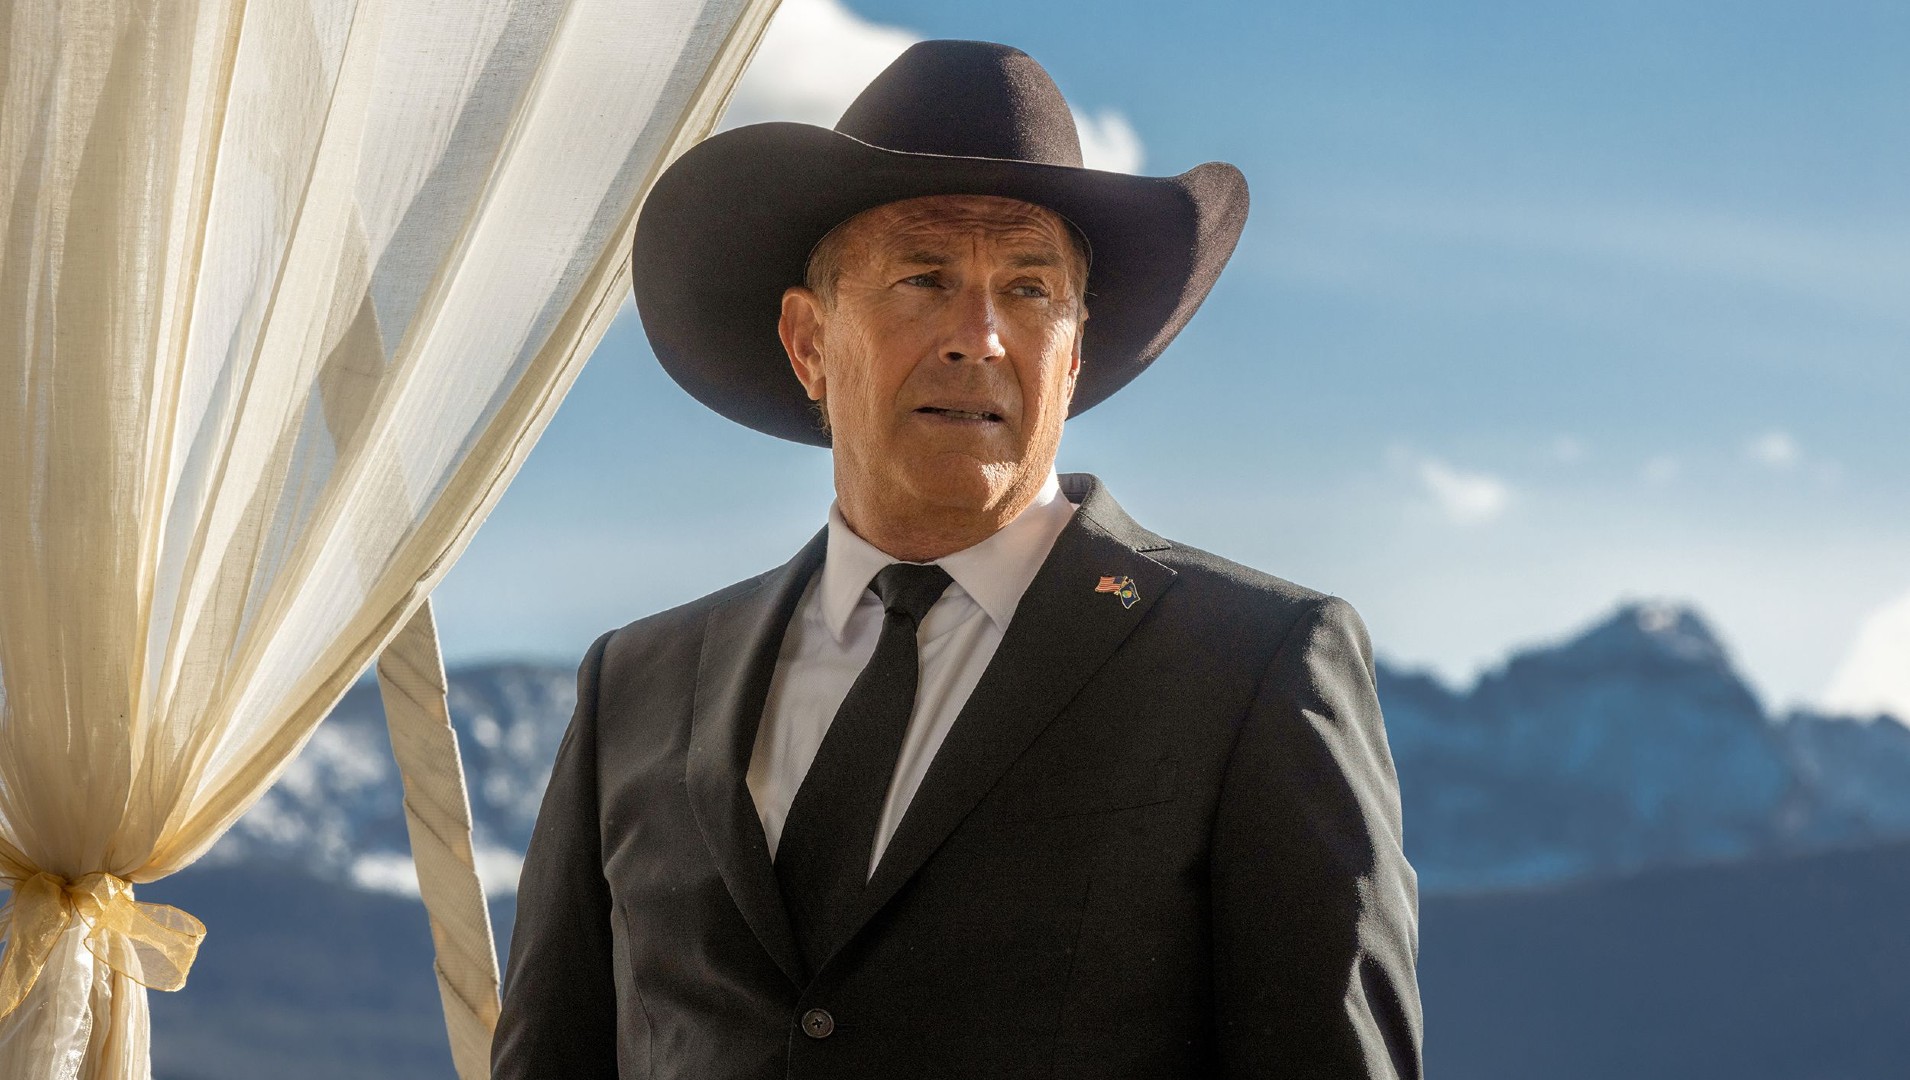 Yellowstone Season 1: The Epic Western Drama Unveiled – Family Feuds, Untamed Frontiers, and More!